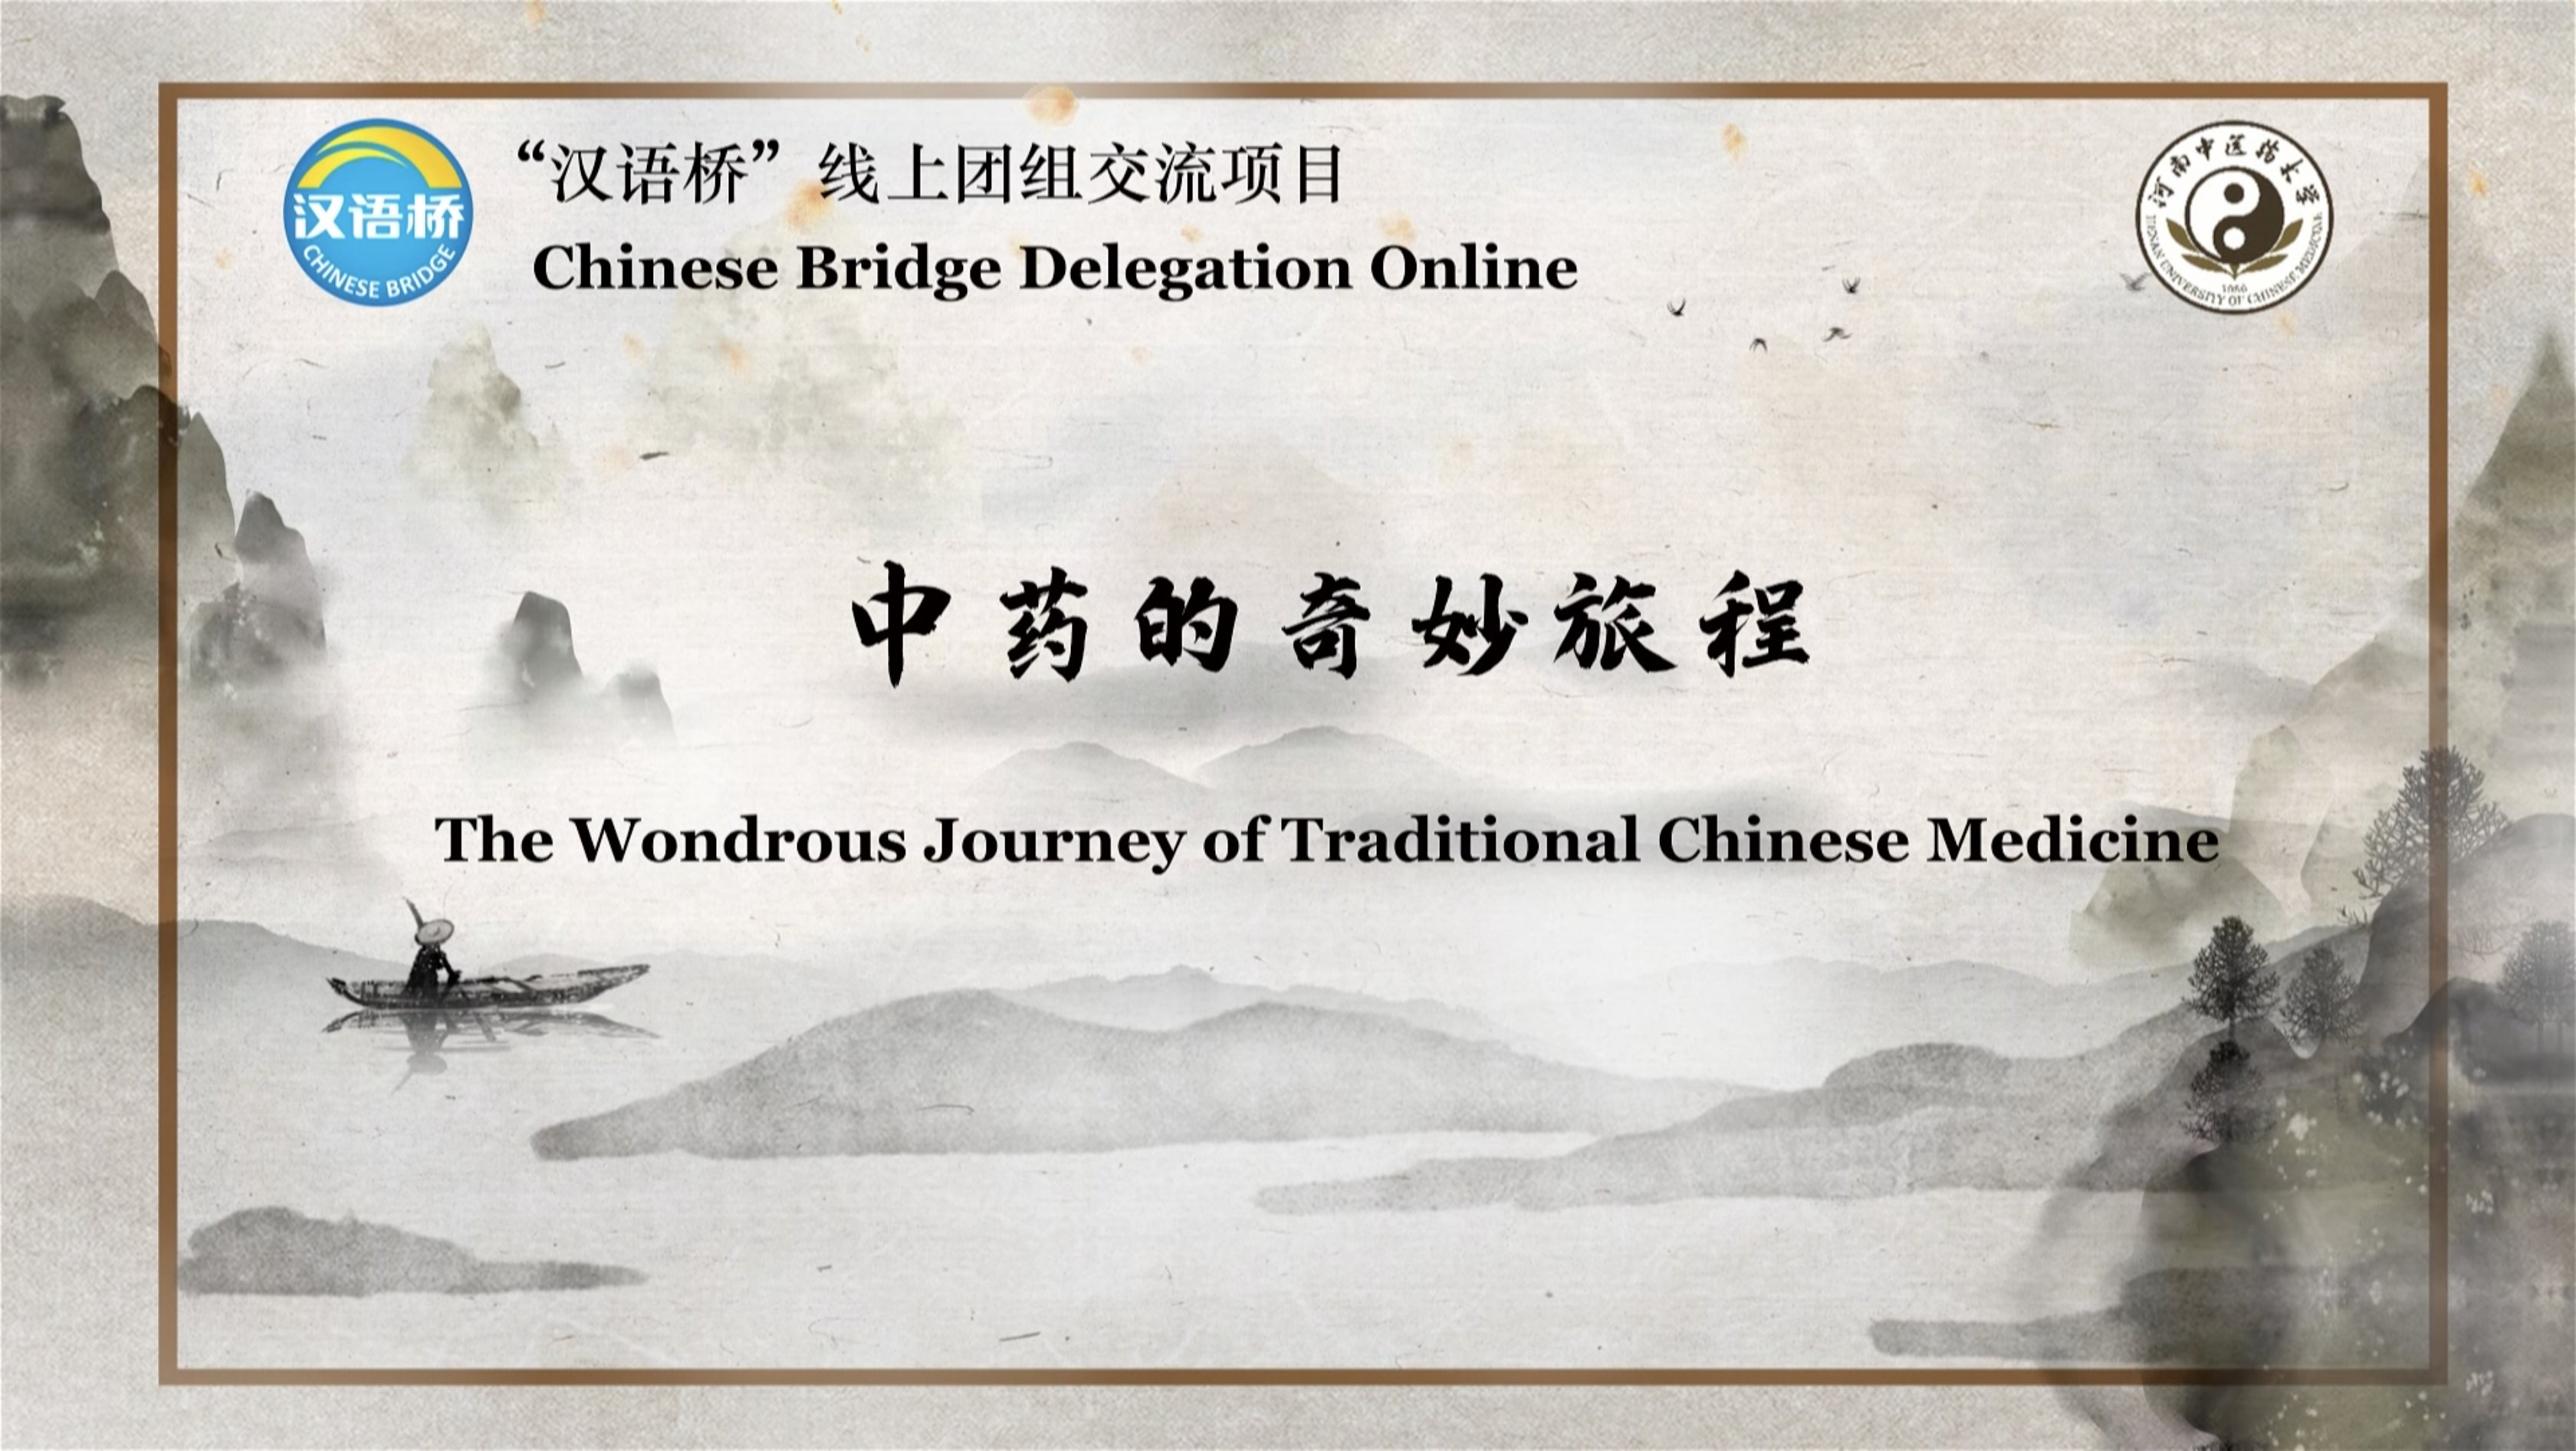 the Wondrous Journey of Traditional Chinese Medicine